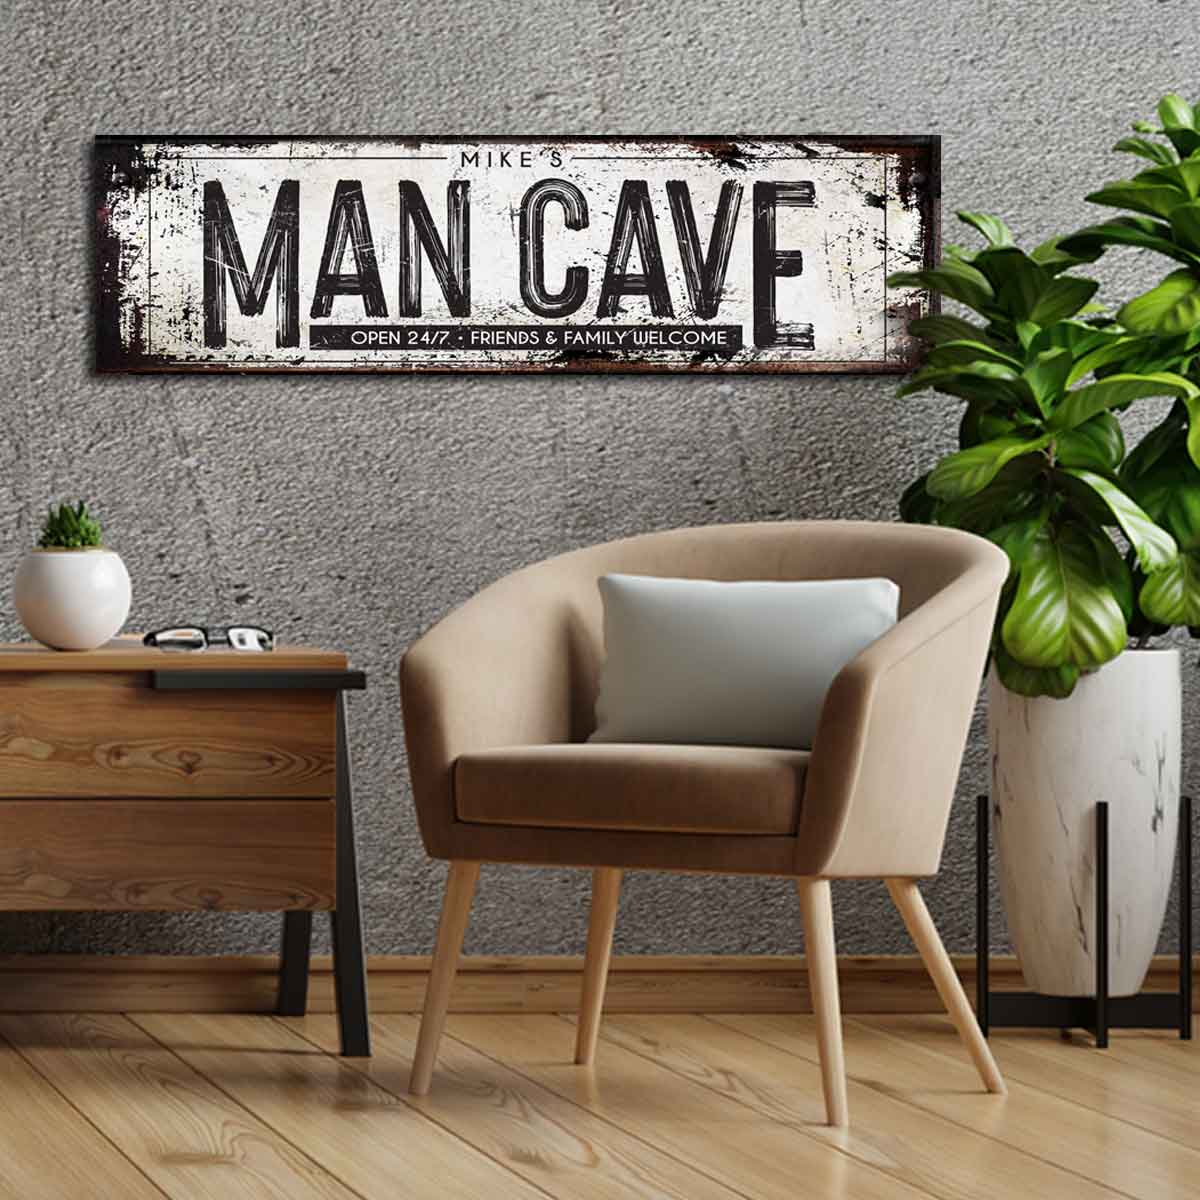 MAN CAVE SIGNS / GIFTS FOR DAD / GIFTS FOR HIM / GARAGE SIGNS FOR